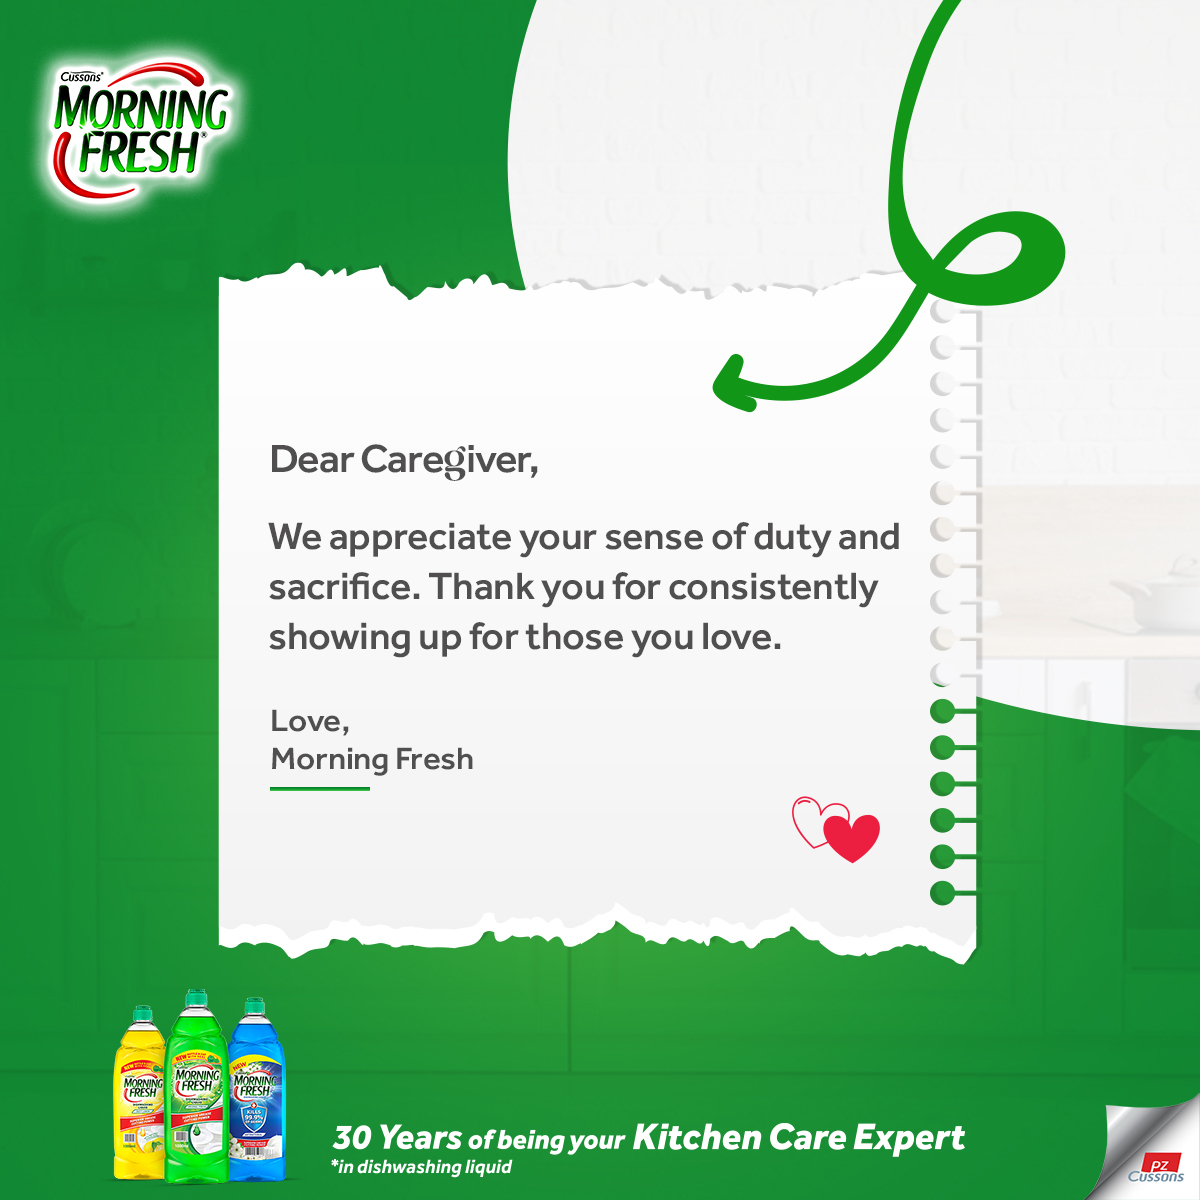 In life, there are compassionate people whose sense of duty drives them to consistently provide, support and protect those they love. These are the everyday Caregivers in every home, #MorningFresh thanks you for all you do in the lives of those you touch. 
#CaringForTheCaregiver